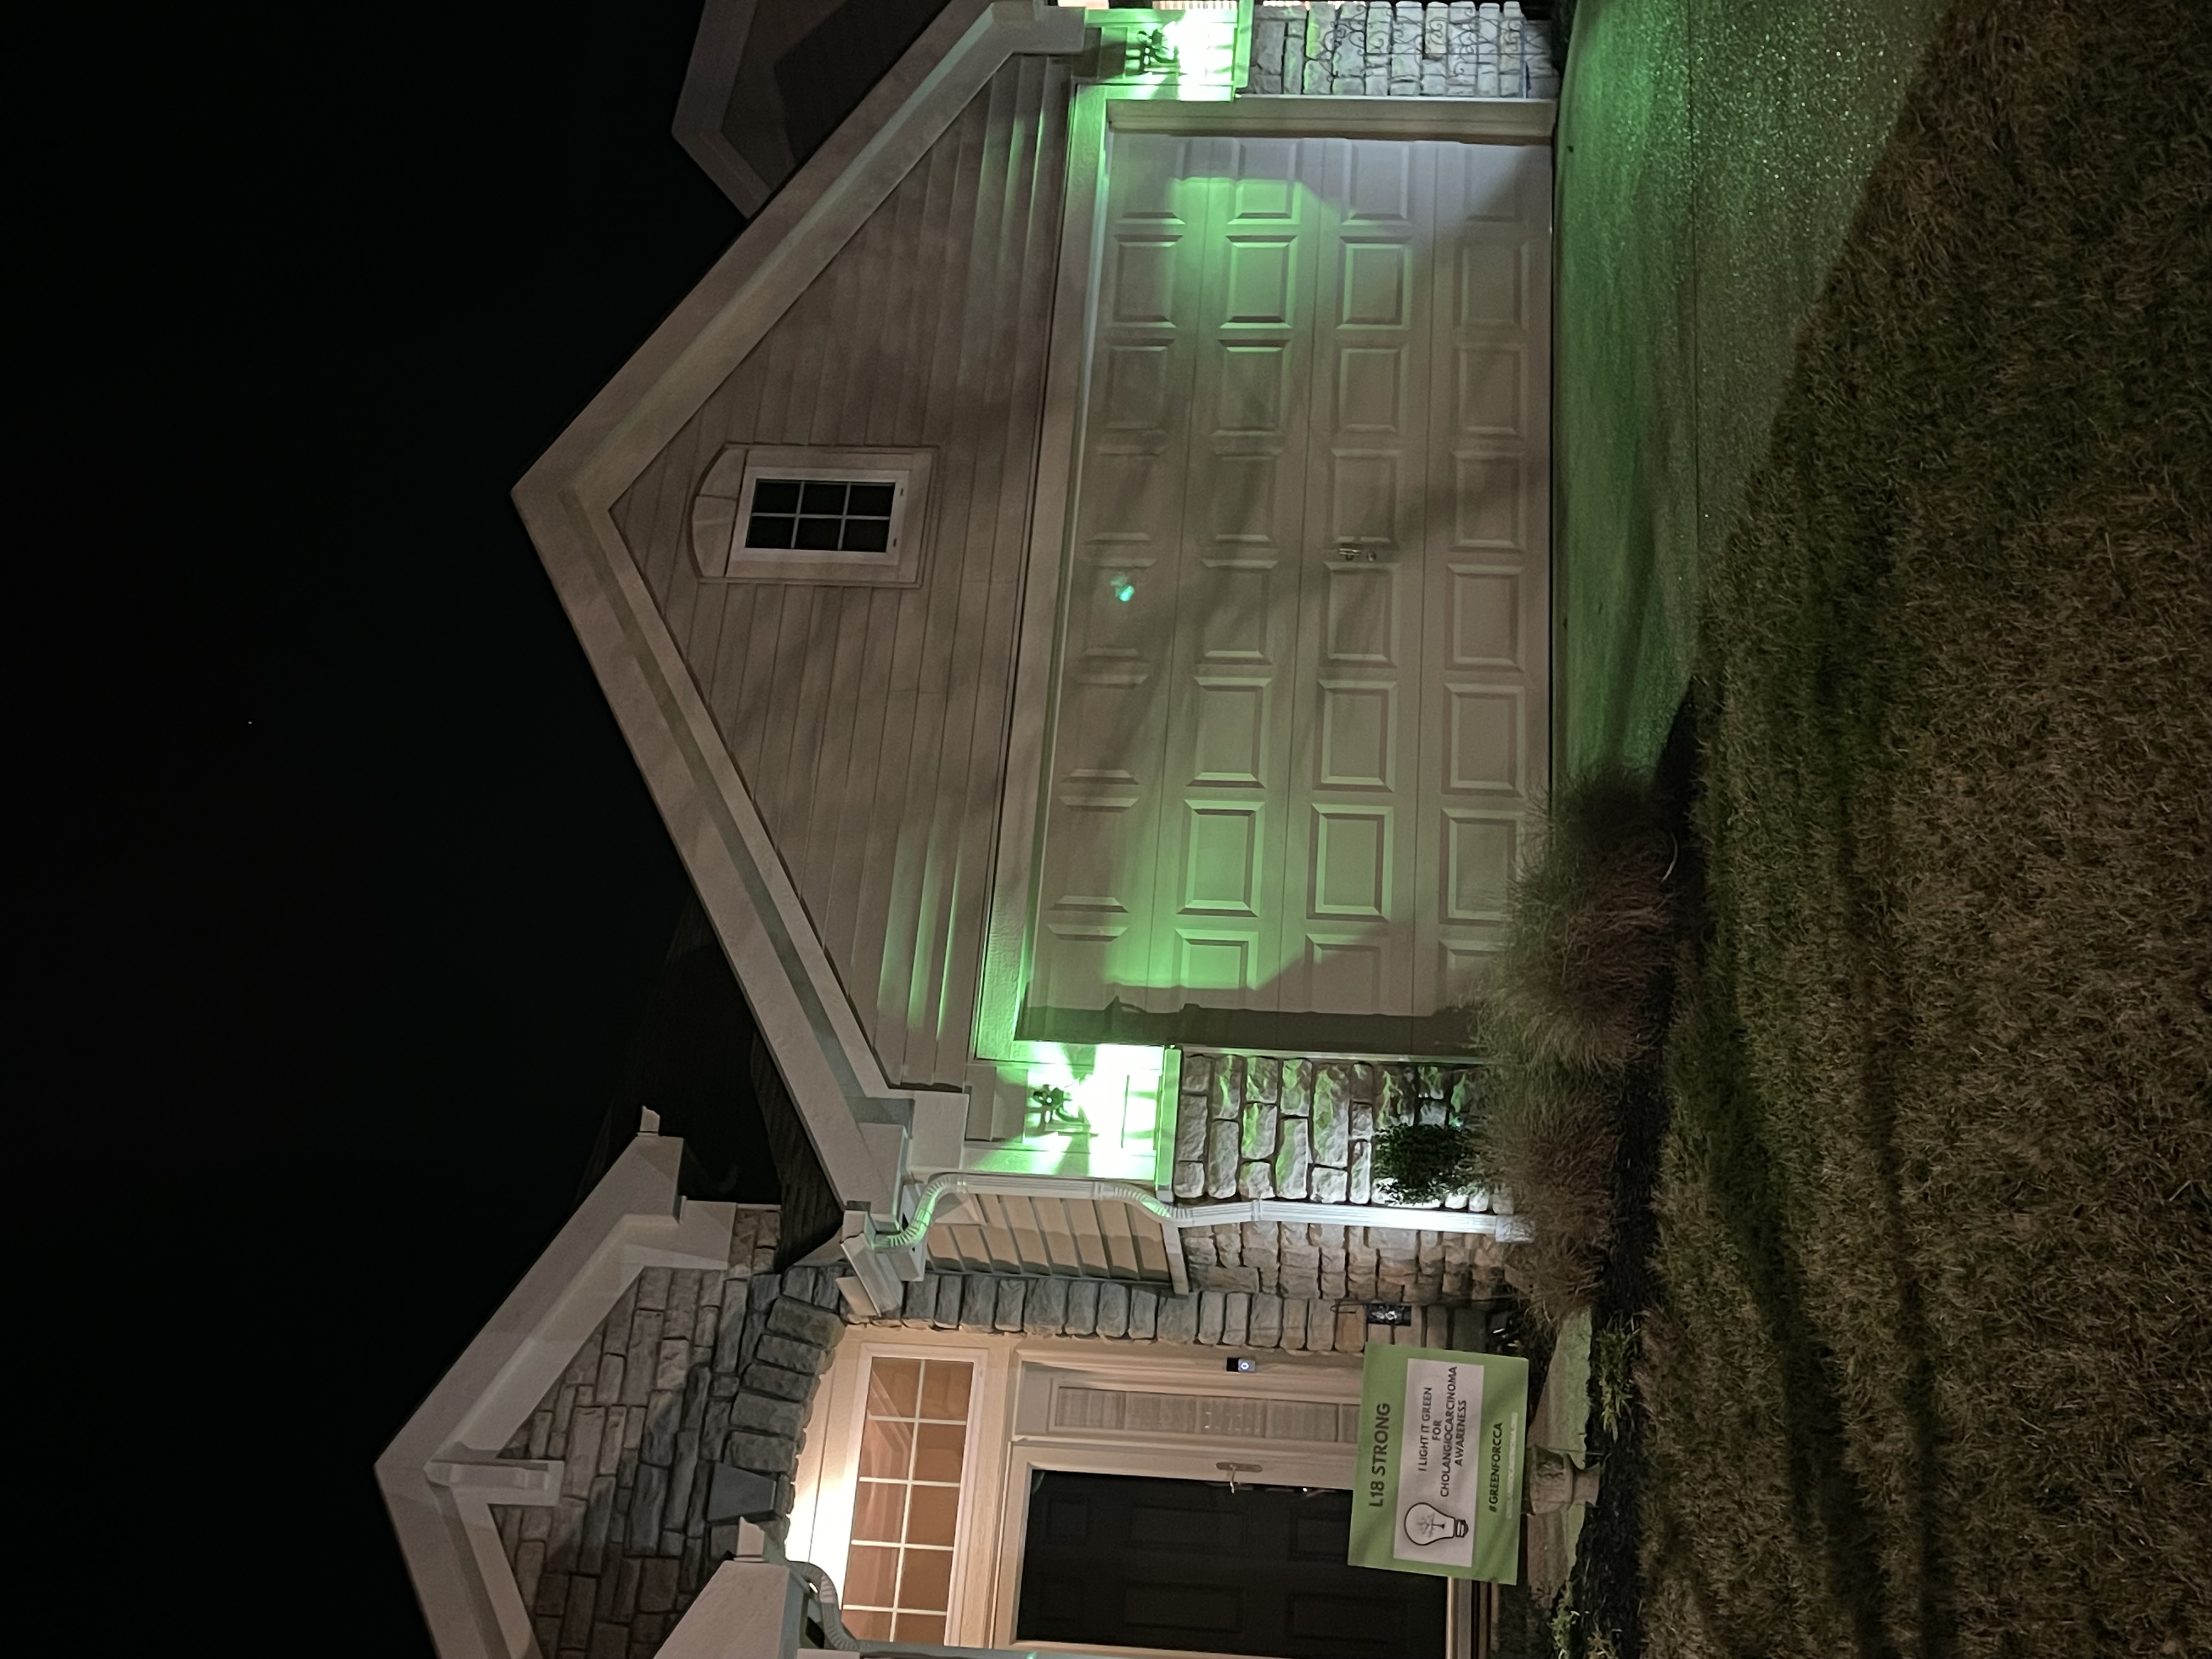 Upload your "Light It Green" photo